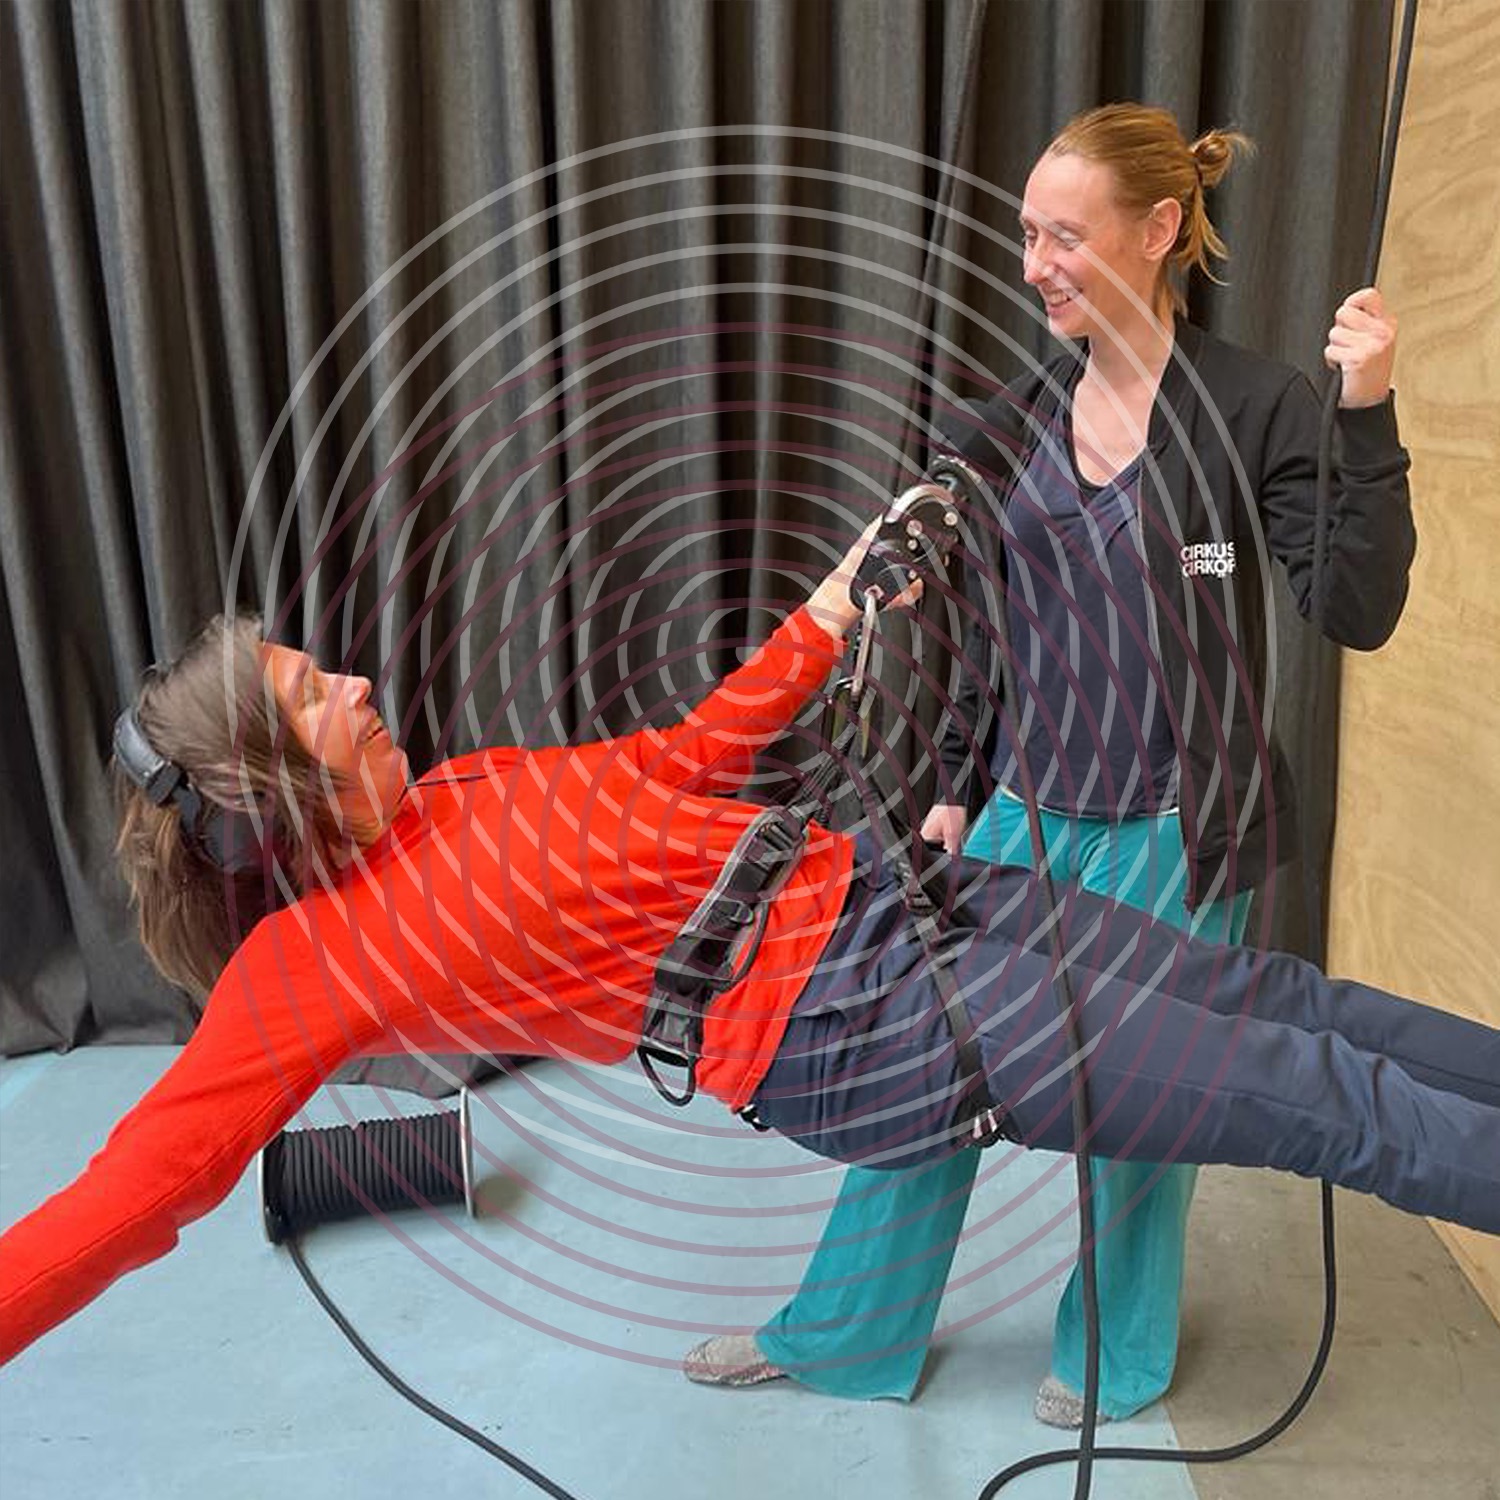 ”How to deal with the taboo of recovering in circus” Saar Rombout & Sienna Bruce in Circus Whispers Season3 ep.